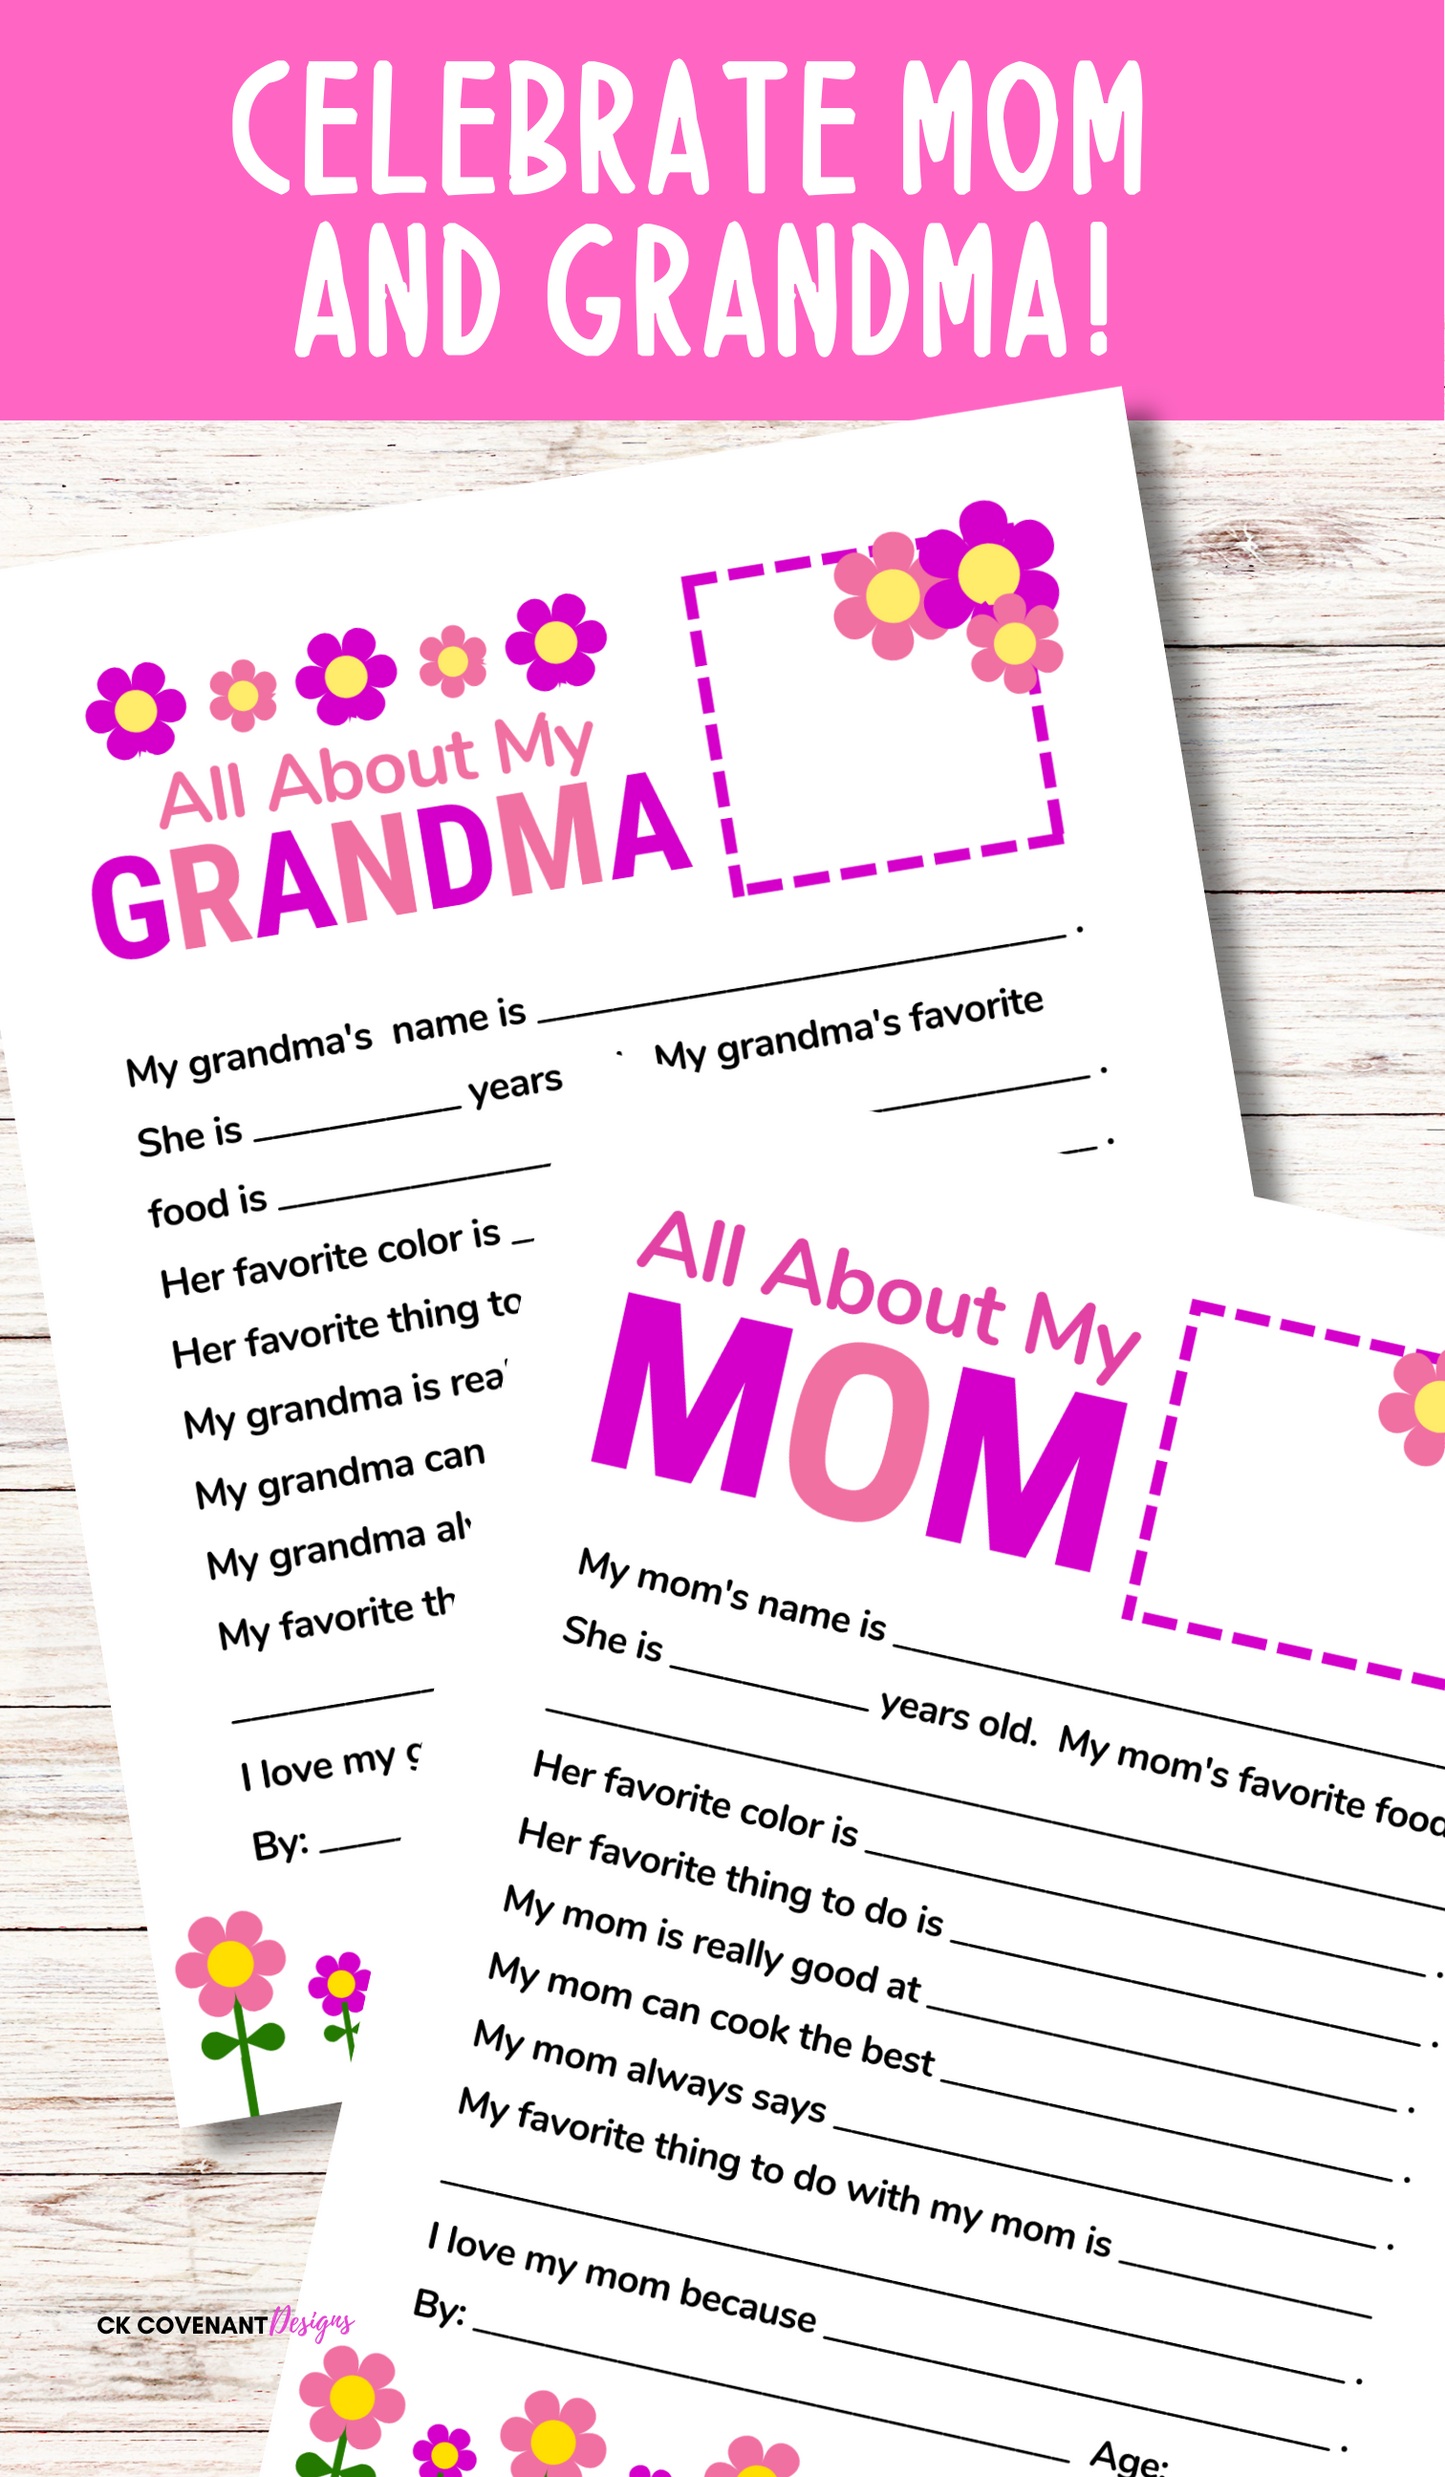 All About Mom Mother’s Day Questionnaire/ All About Grandma Questionnaire